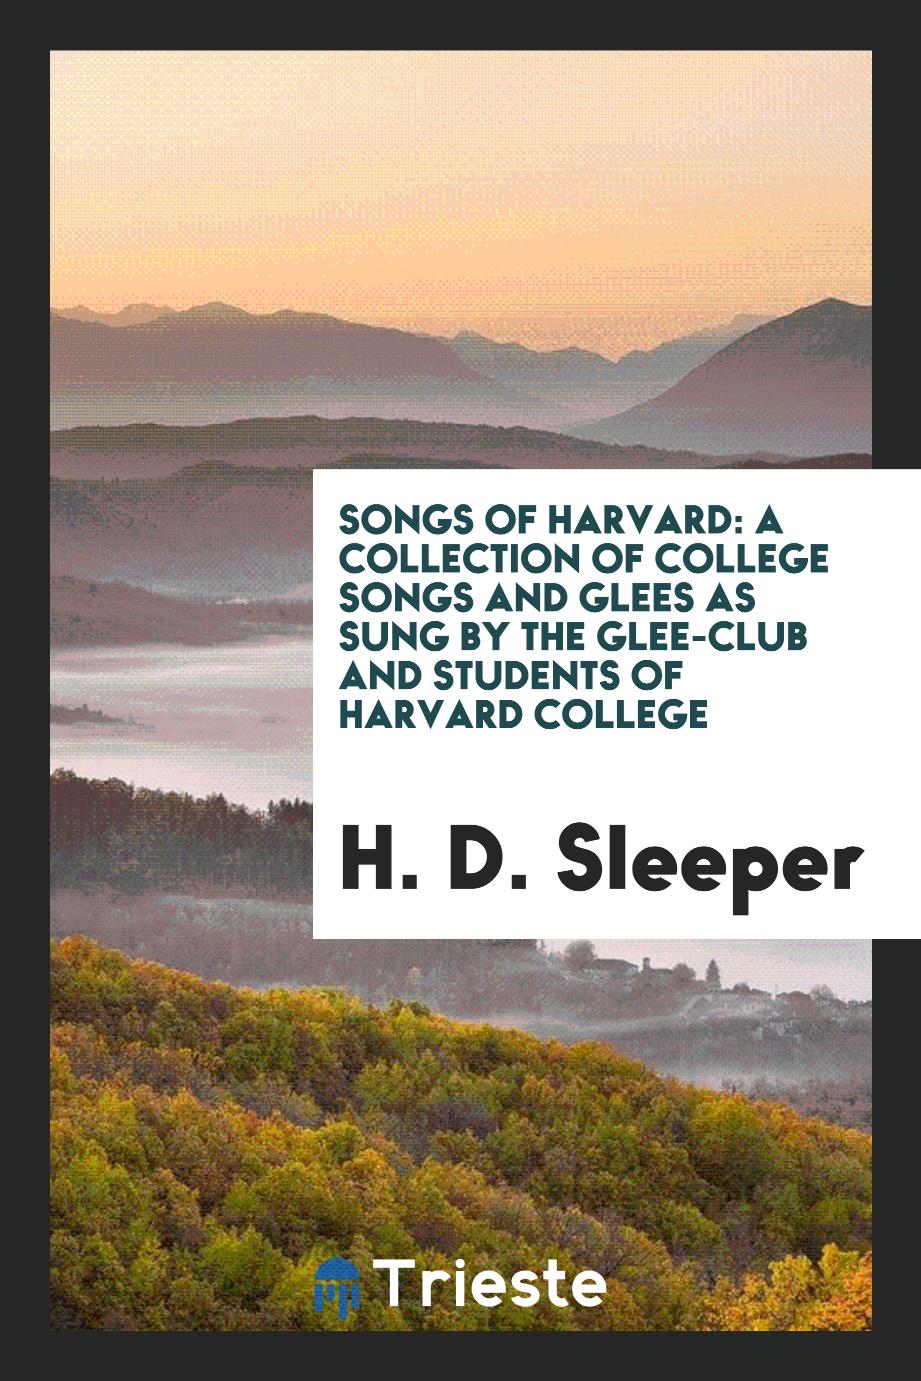 Songs of Harvard: A Collection of College Songs and Glees as Sung by the Glee-Club and Students of Harvard College